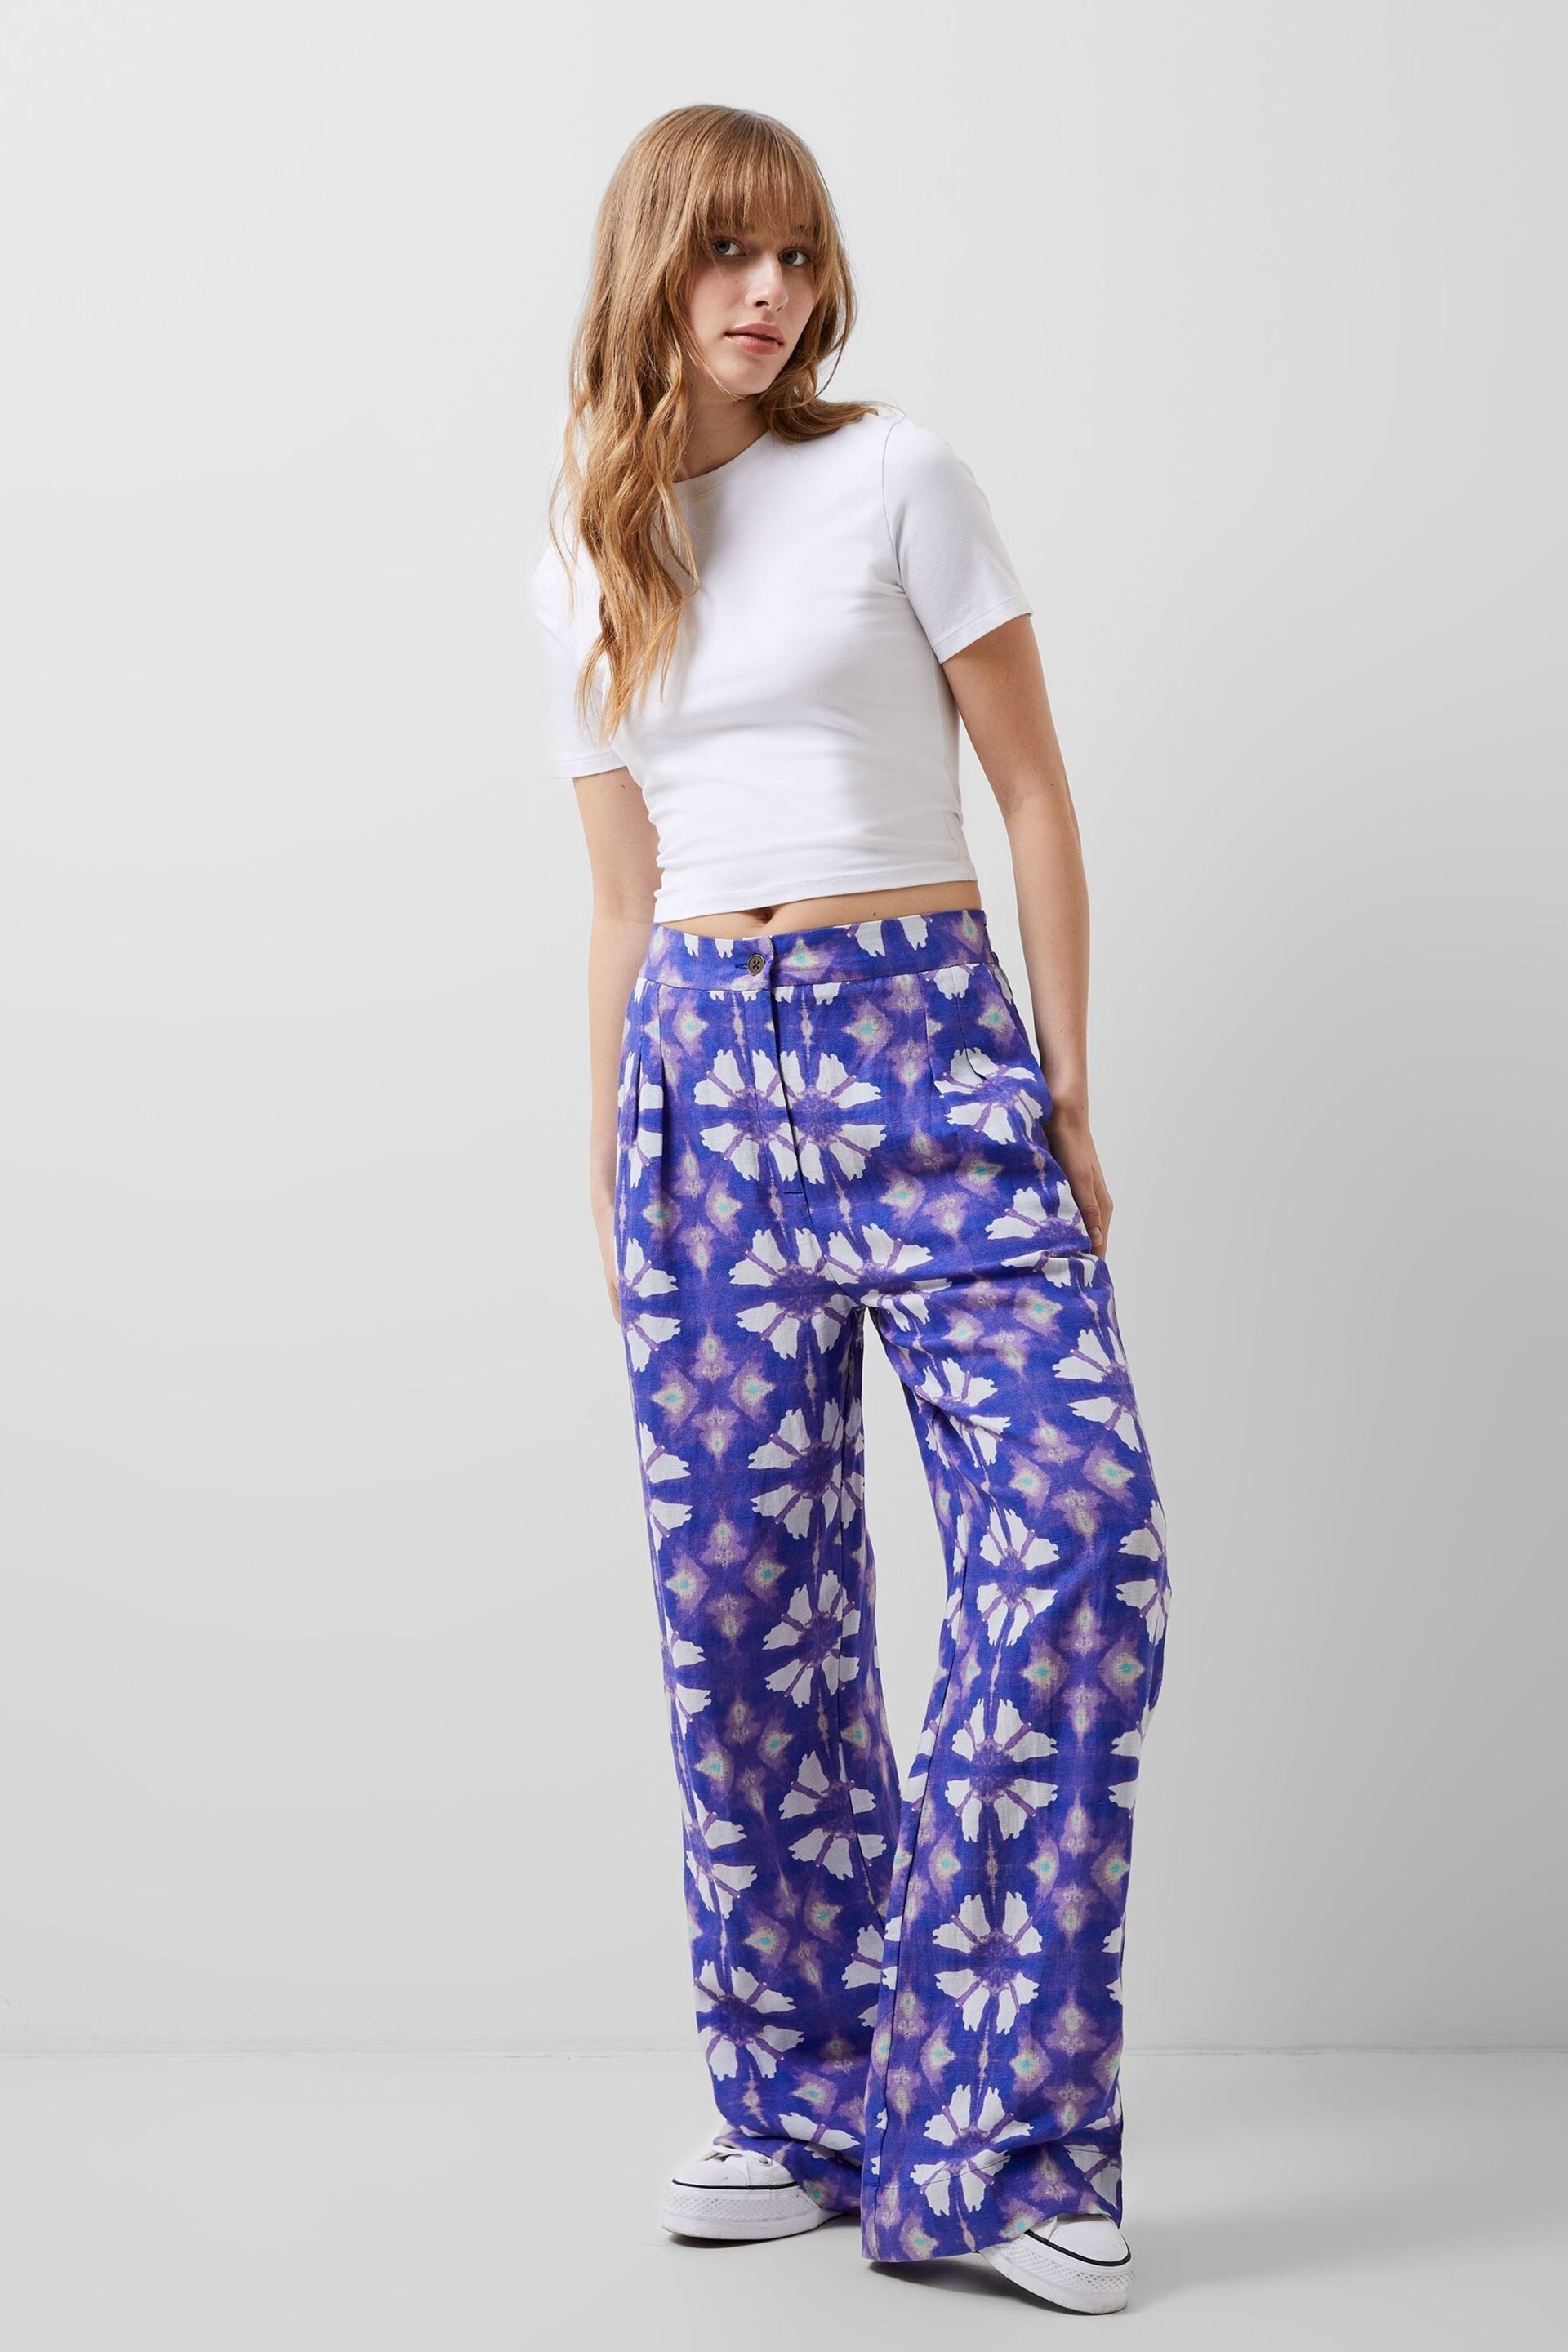 French Connection Dory Birdie Linen Trousers - Image 1 of 4